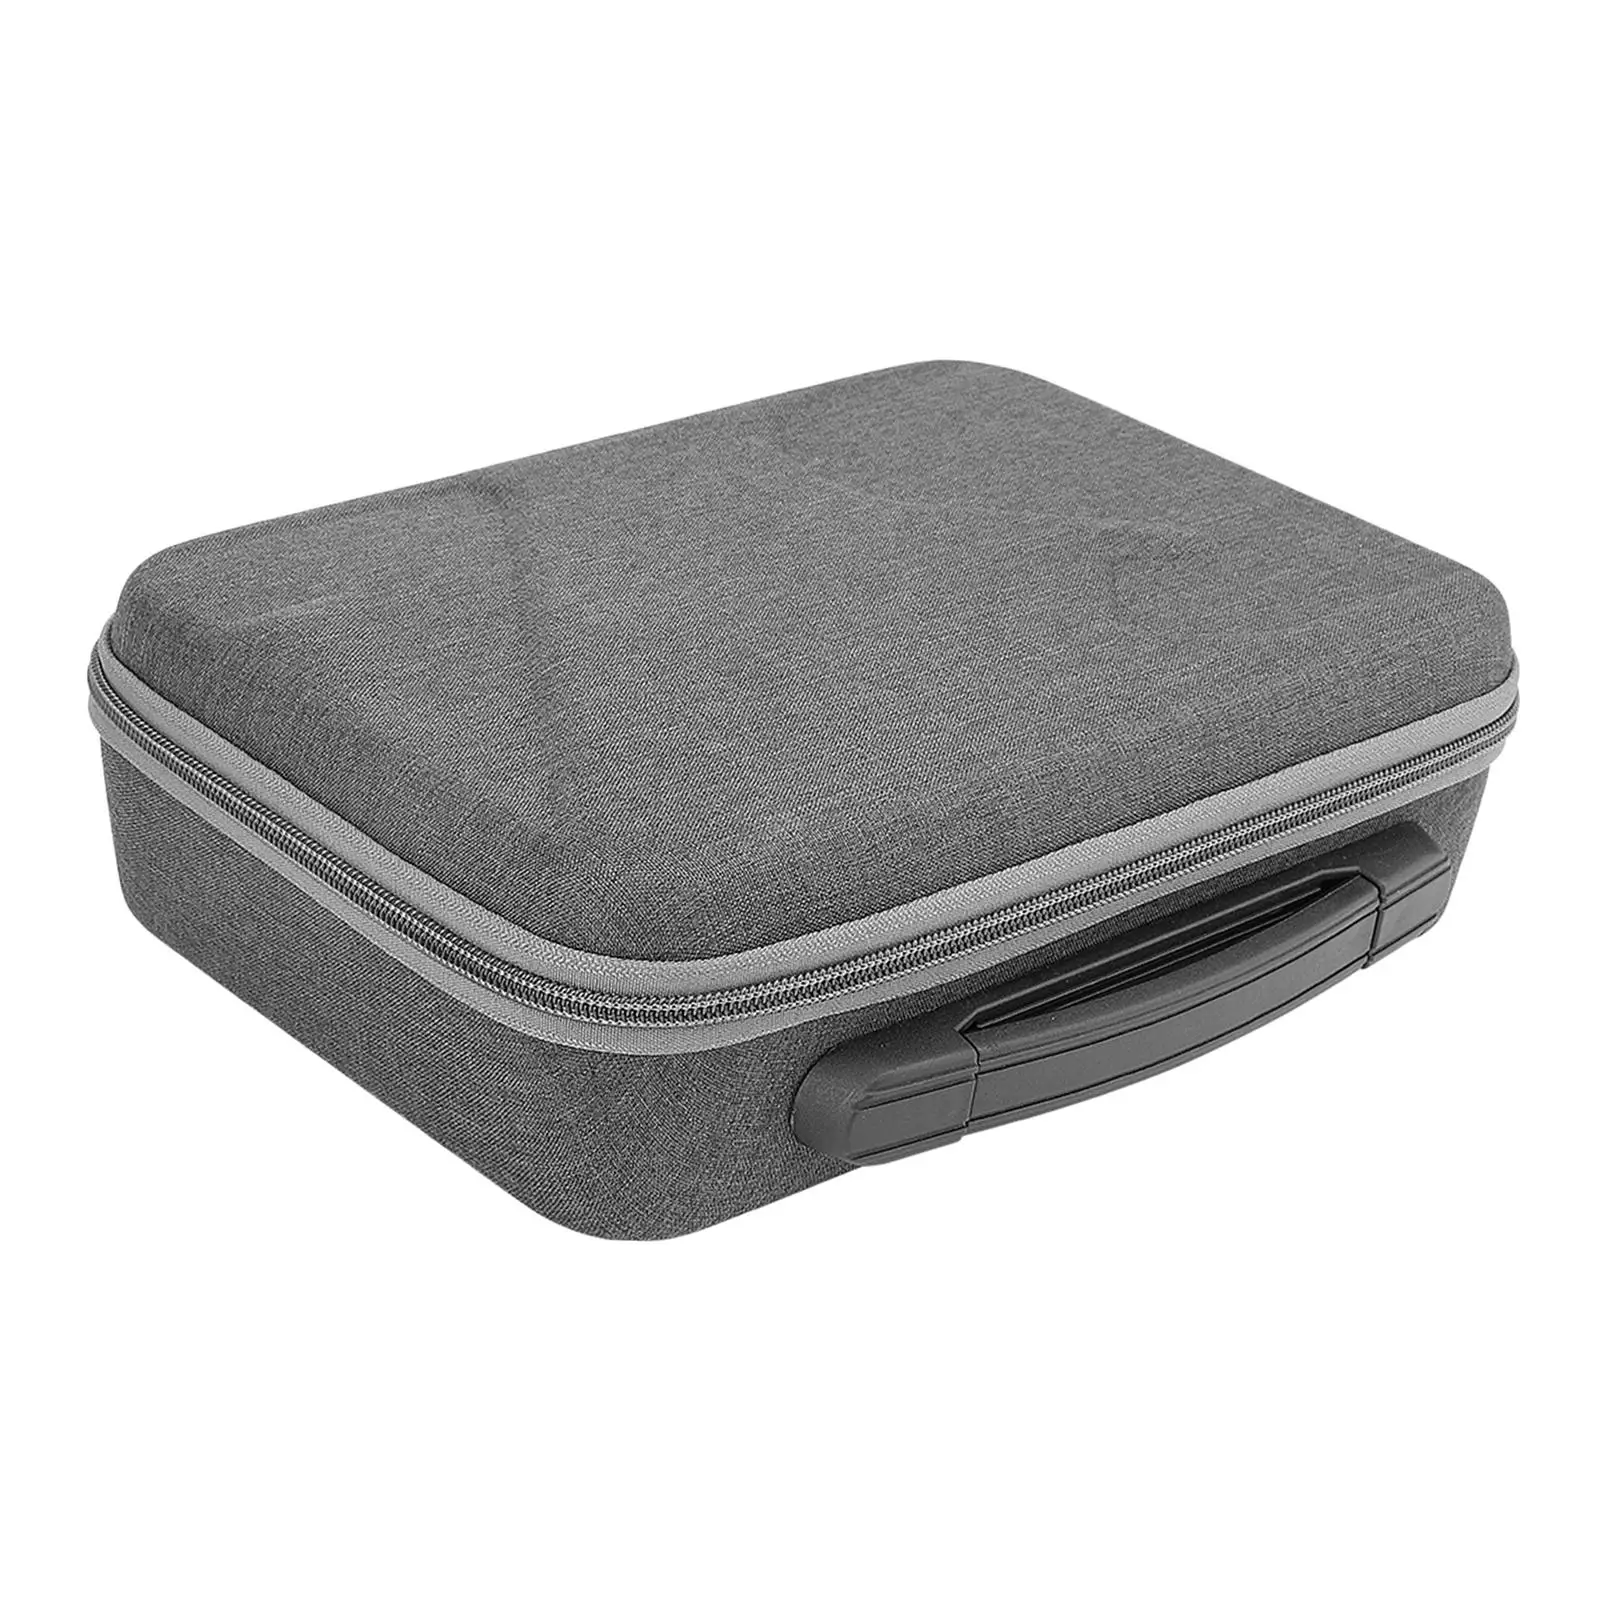 Outdoor  Carrying Case Protective Storage Case for   Accessories